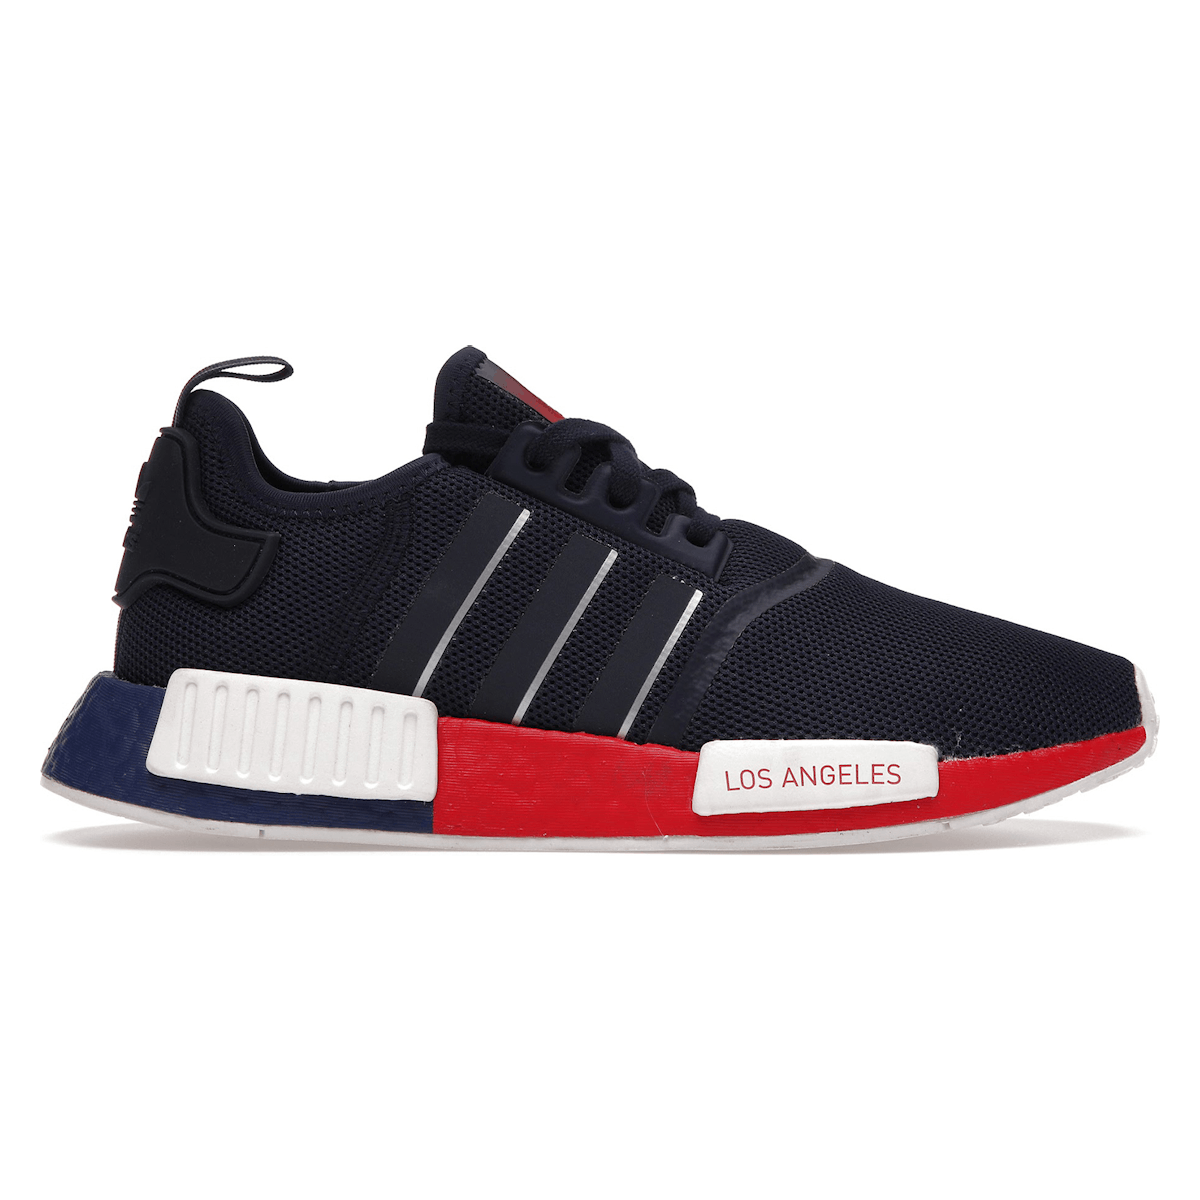 adidas NMD R1 United By Sneakers Los Angeles